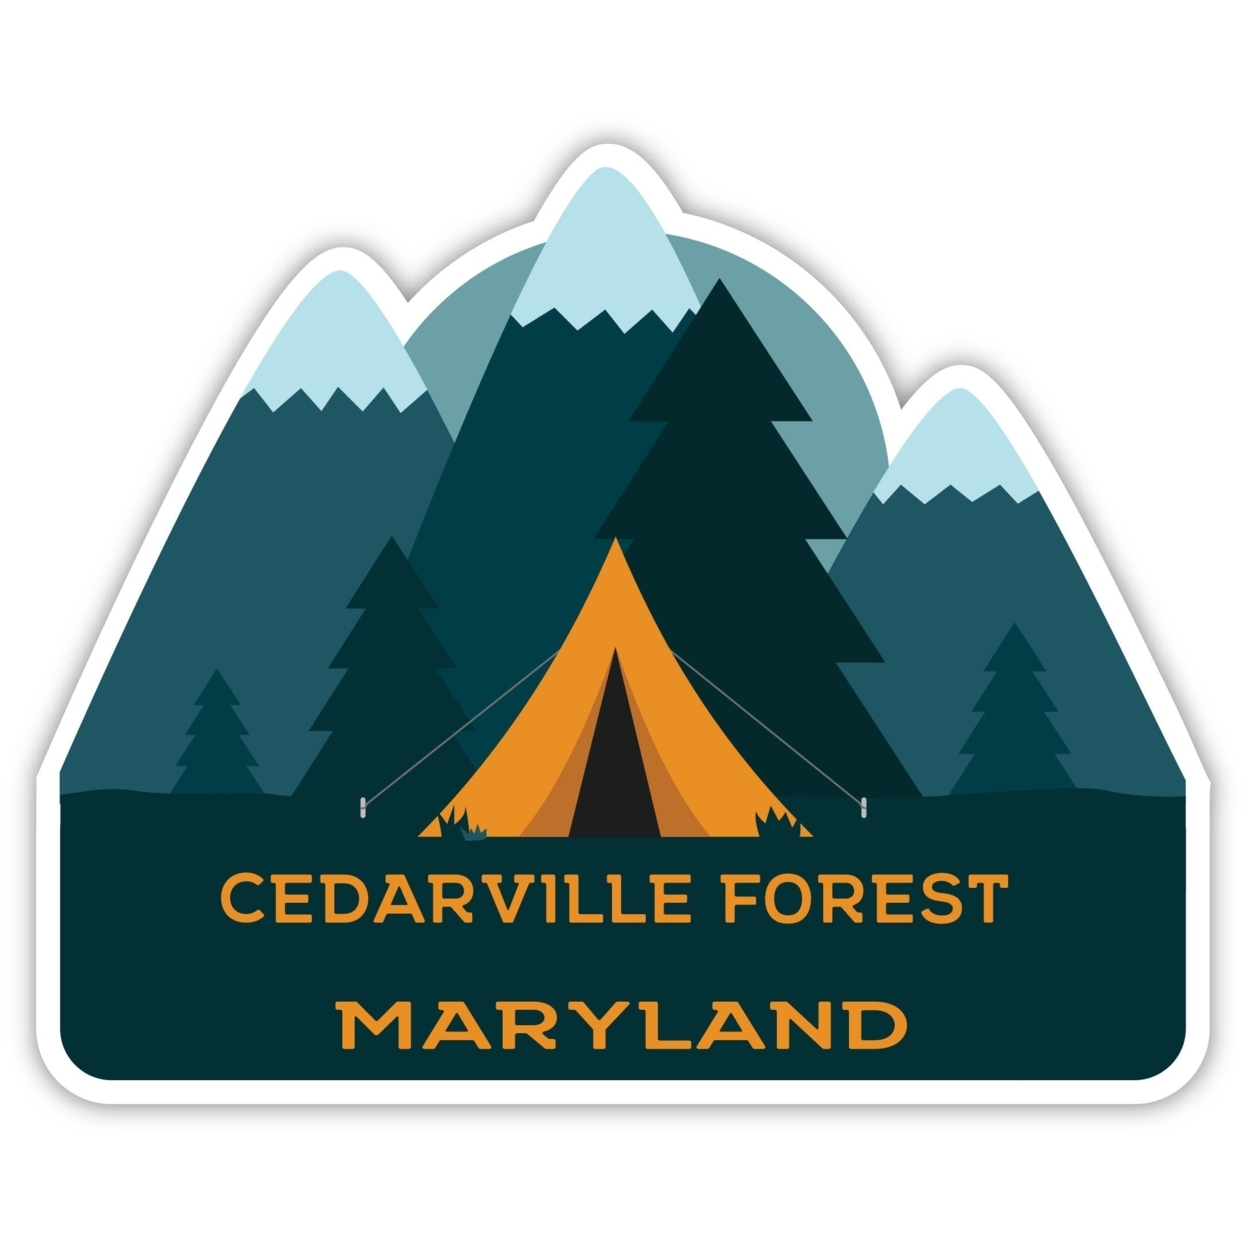 Cedarville Forest Maryland Souvenir Decorative Stickers (Choose Theme And Size) - 4-Pack, 4-Inch, Tent